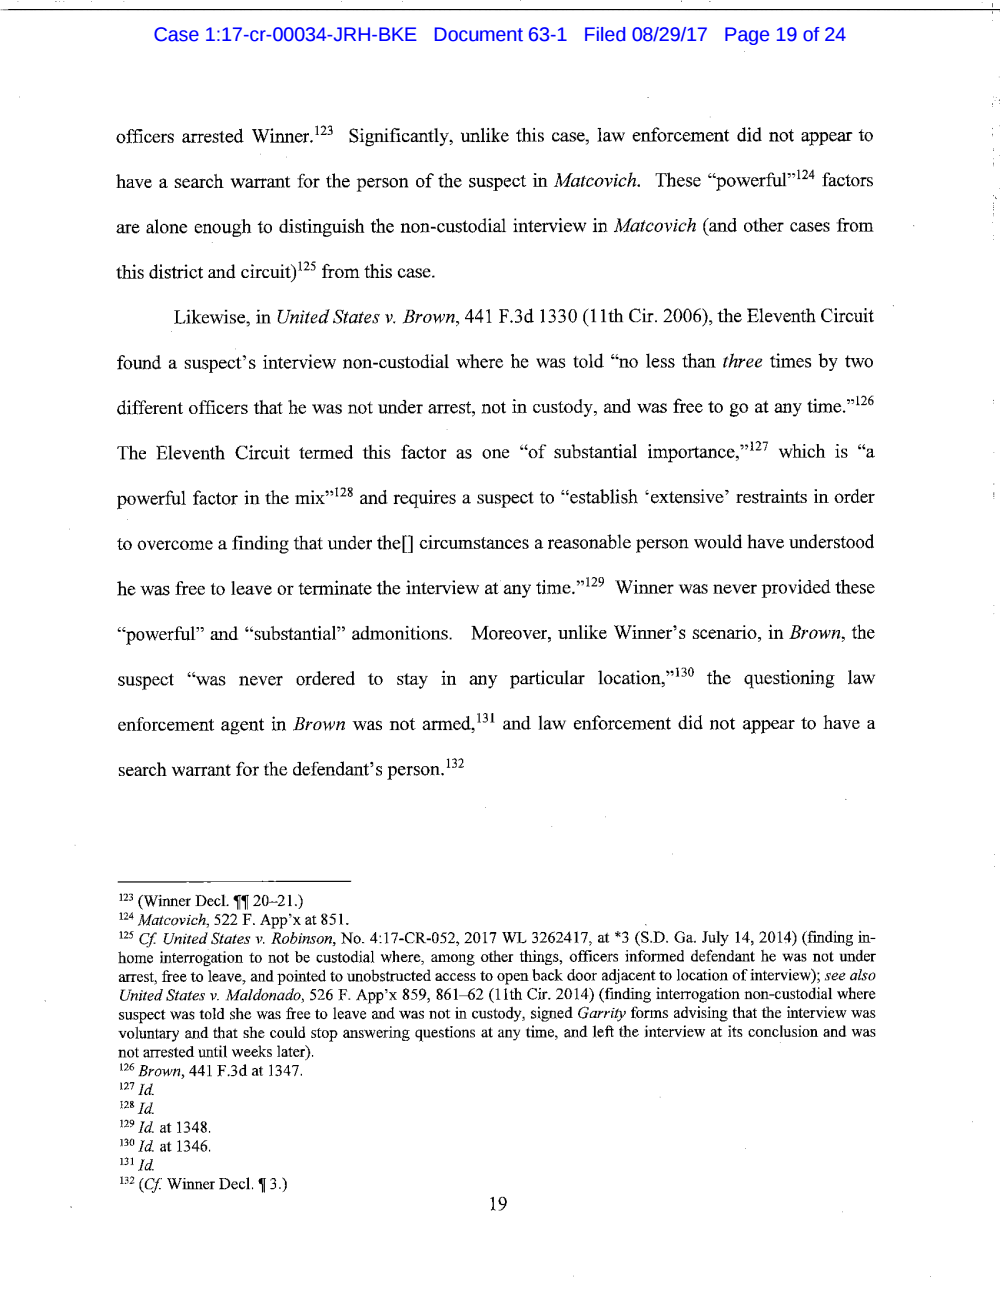 Page 19 from Reality Winner Memo in Support of Motion to Suppress